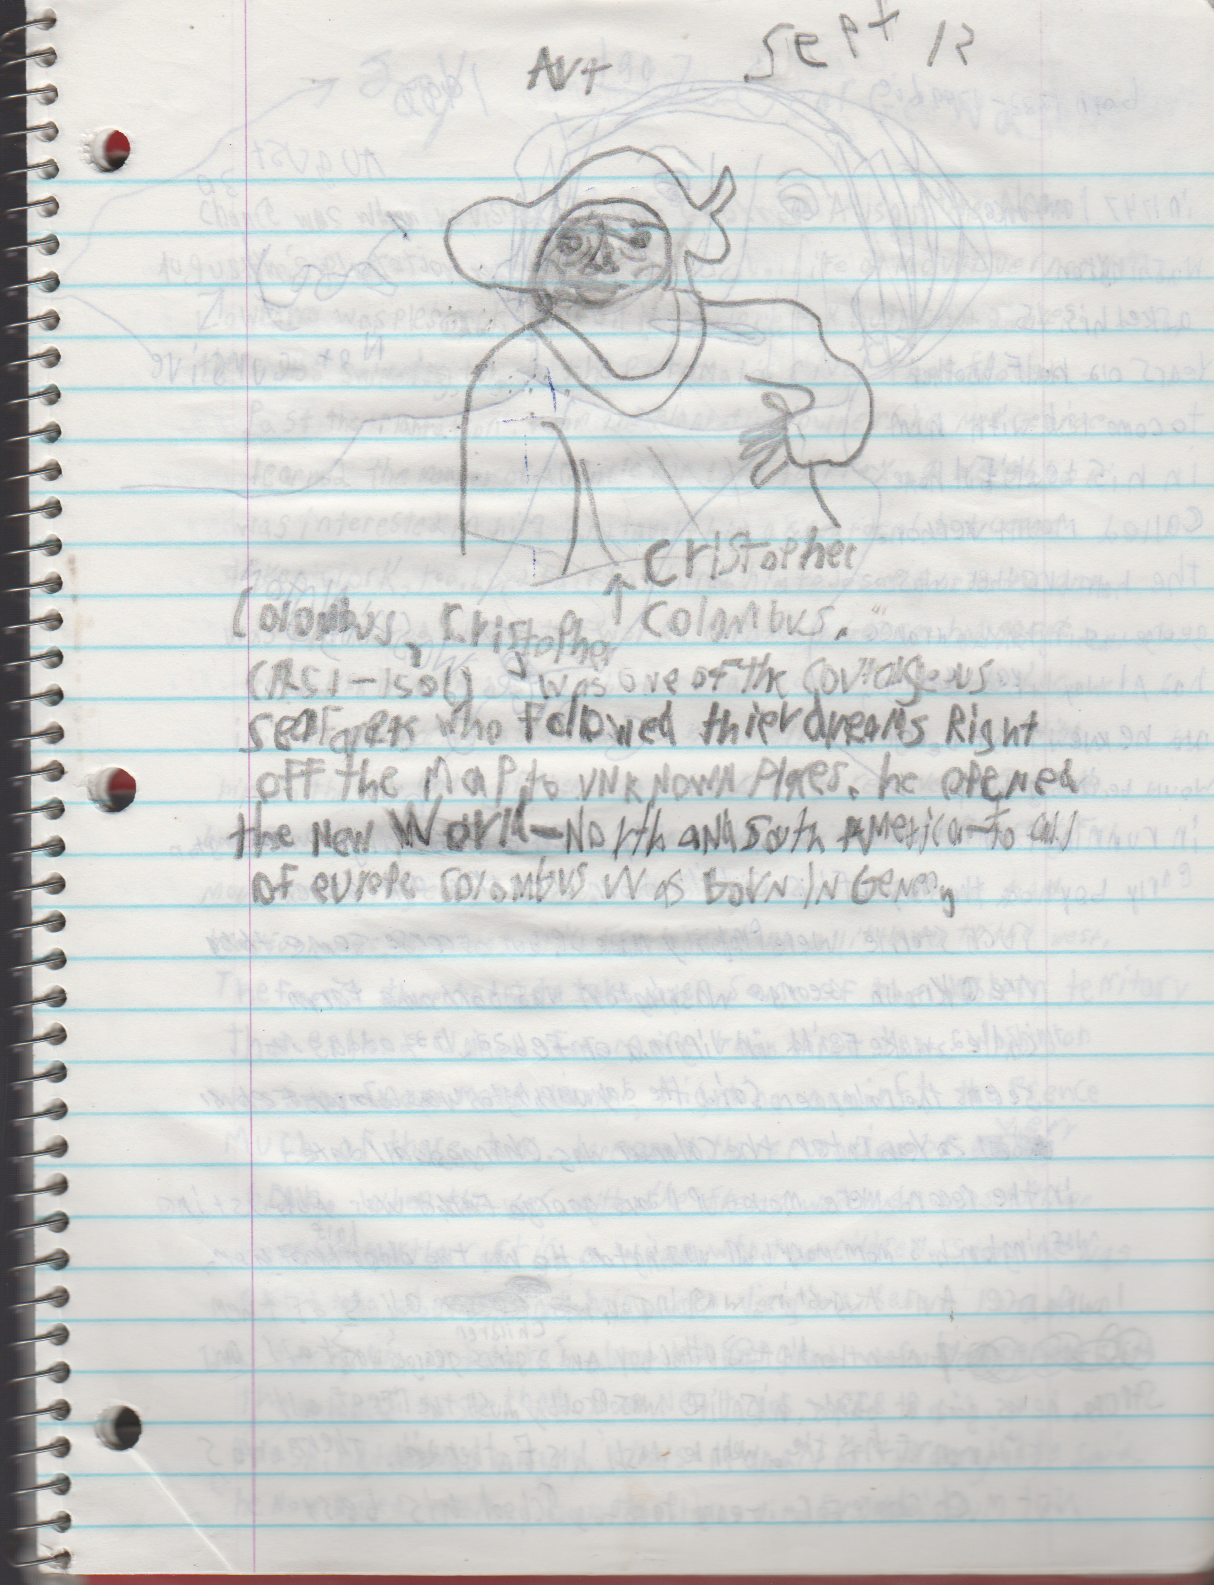 1996-08-18 - Saturday - 11 yr old Joey Arnold's School Book, dates through to 1998 apx, mostly 96, Writings, Drawings, Etc-018.png